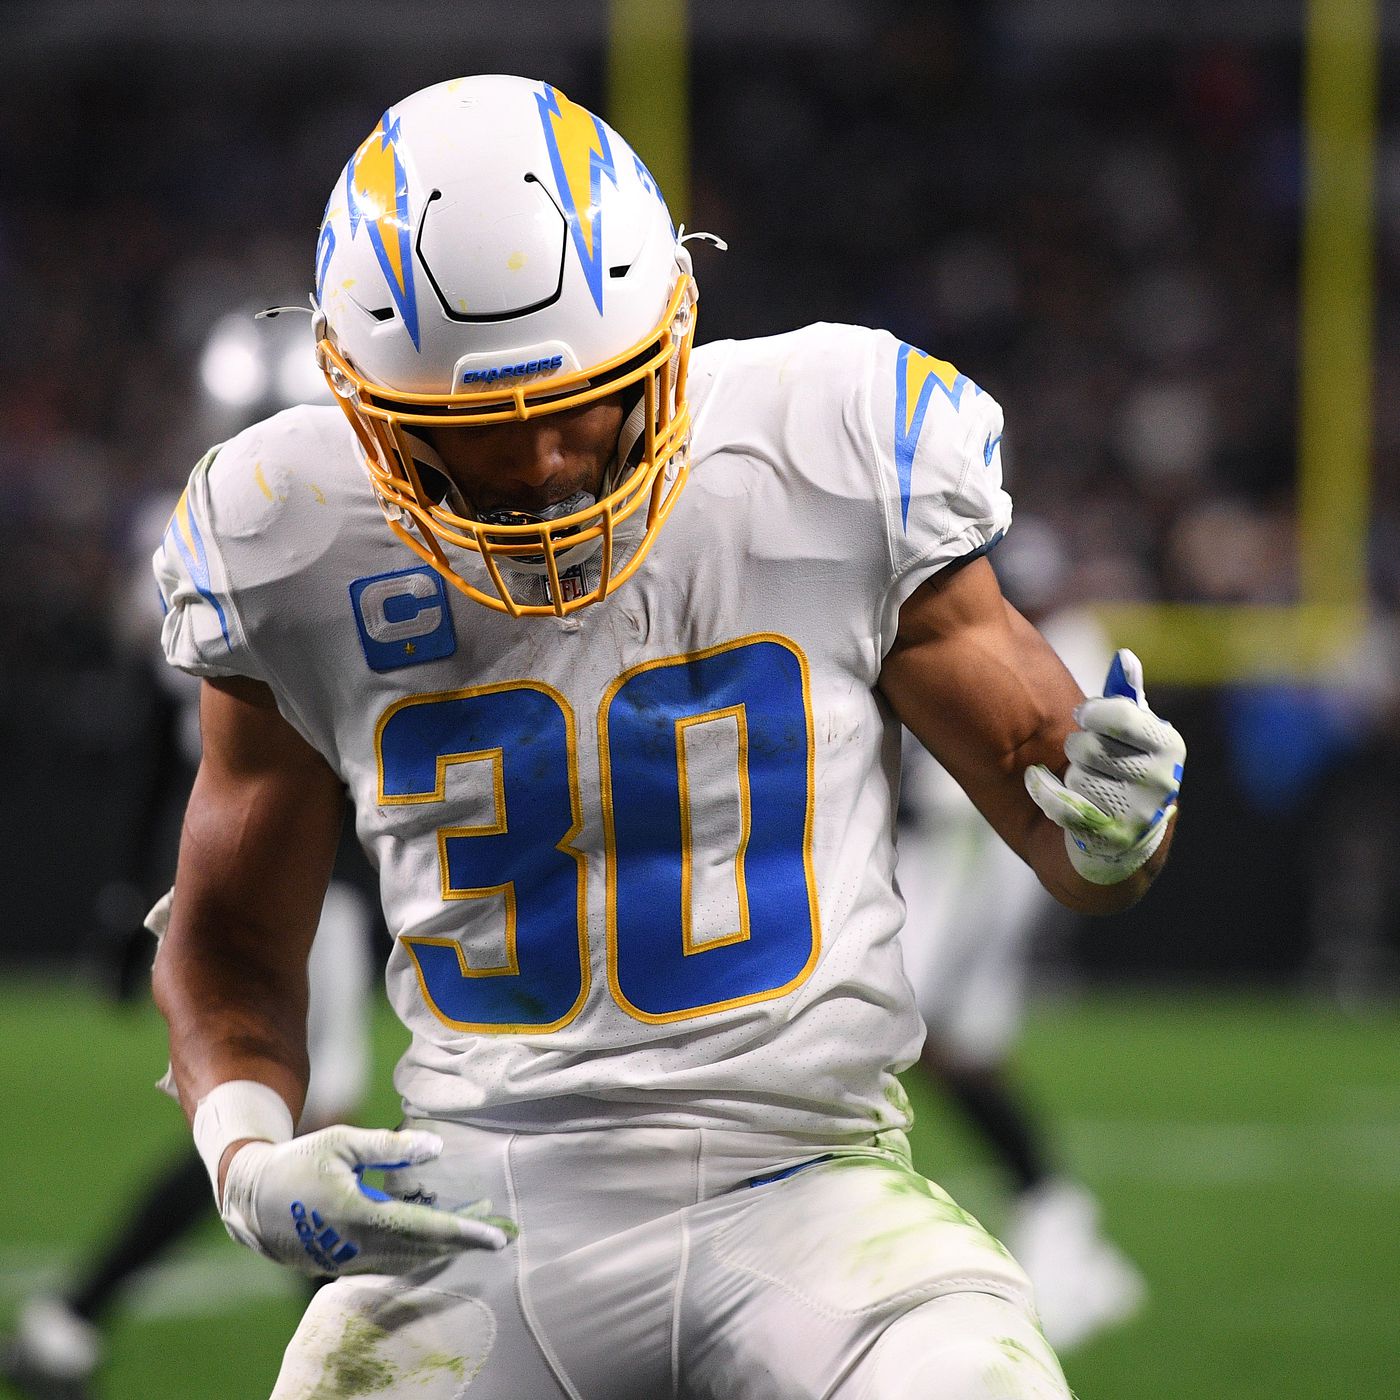 La Chargers Schedule 2022 Chargers Schedule: 2022 Opponents Finalized - Bolts From The Blue